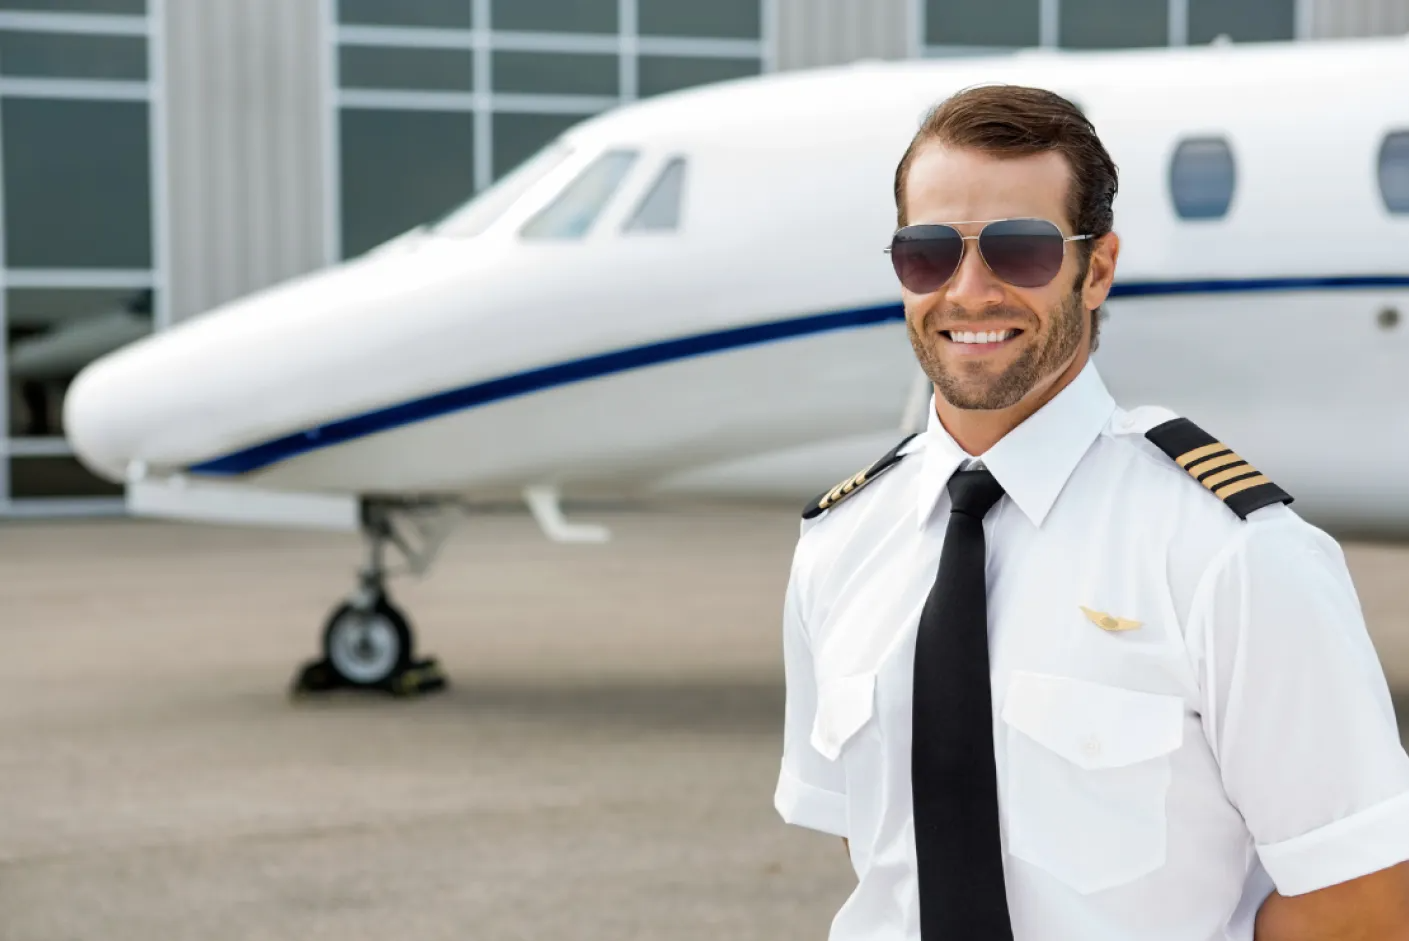 Private pilot practice test : Prepare for your private pilot exam with our practice tests tailored for the United States